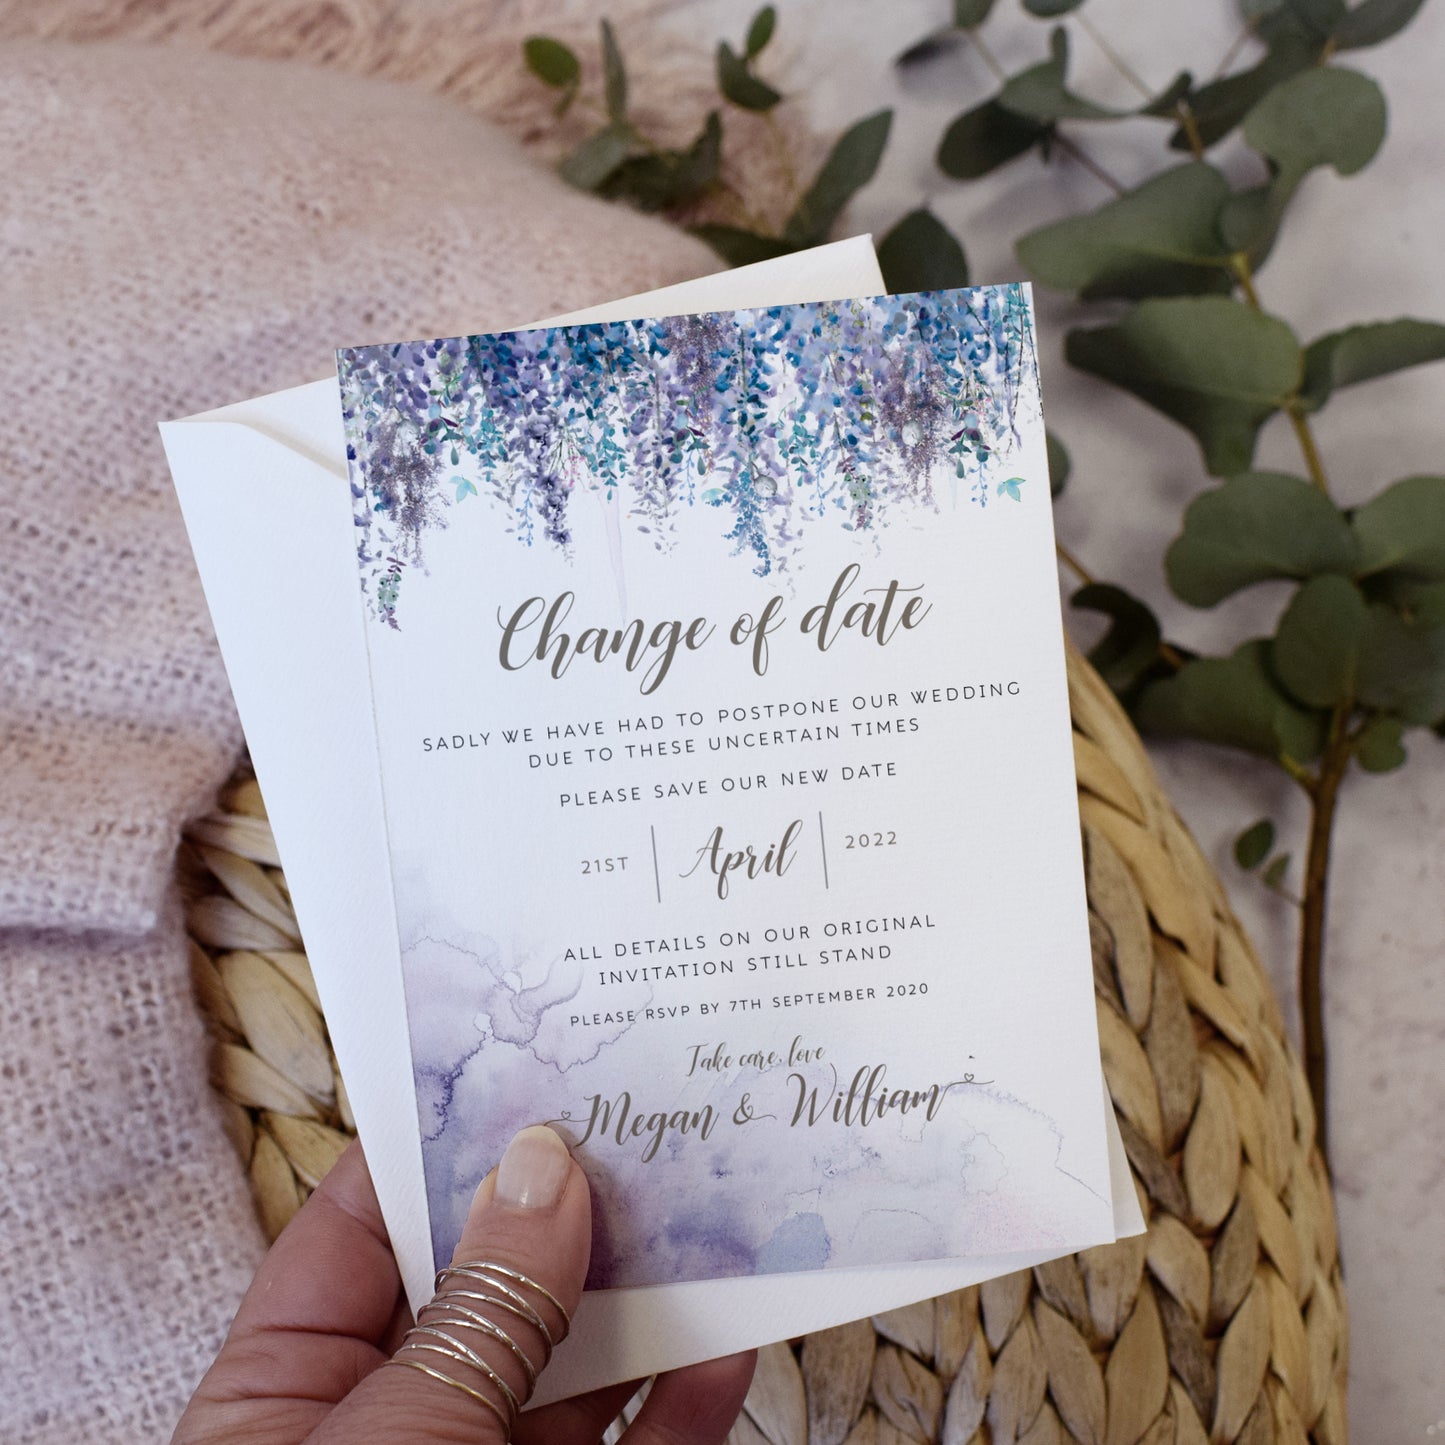 'Whimsical Winter' winter wedding change the date cards